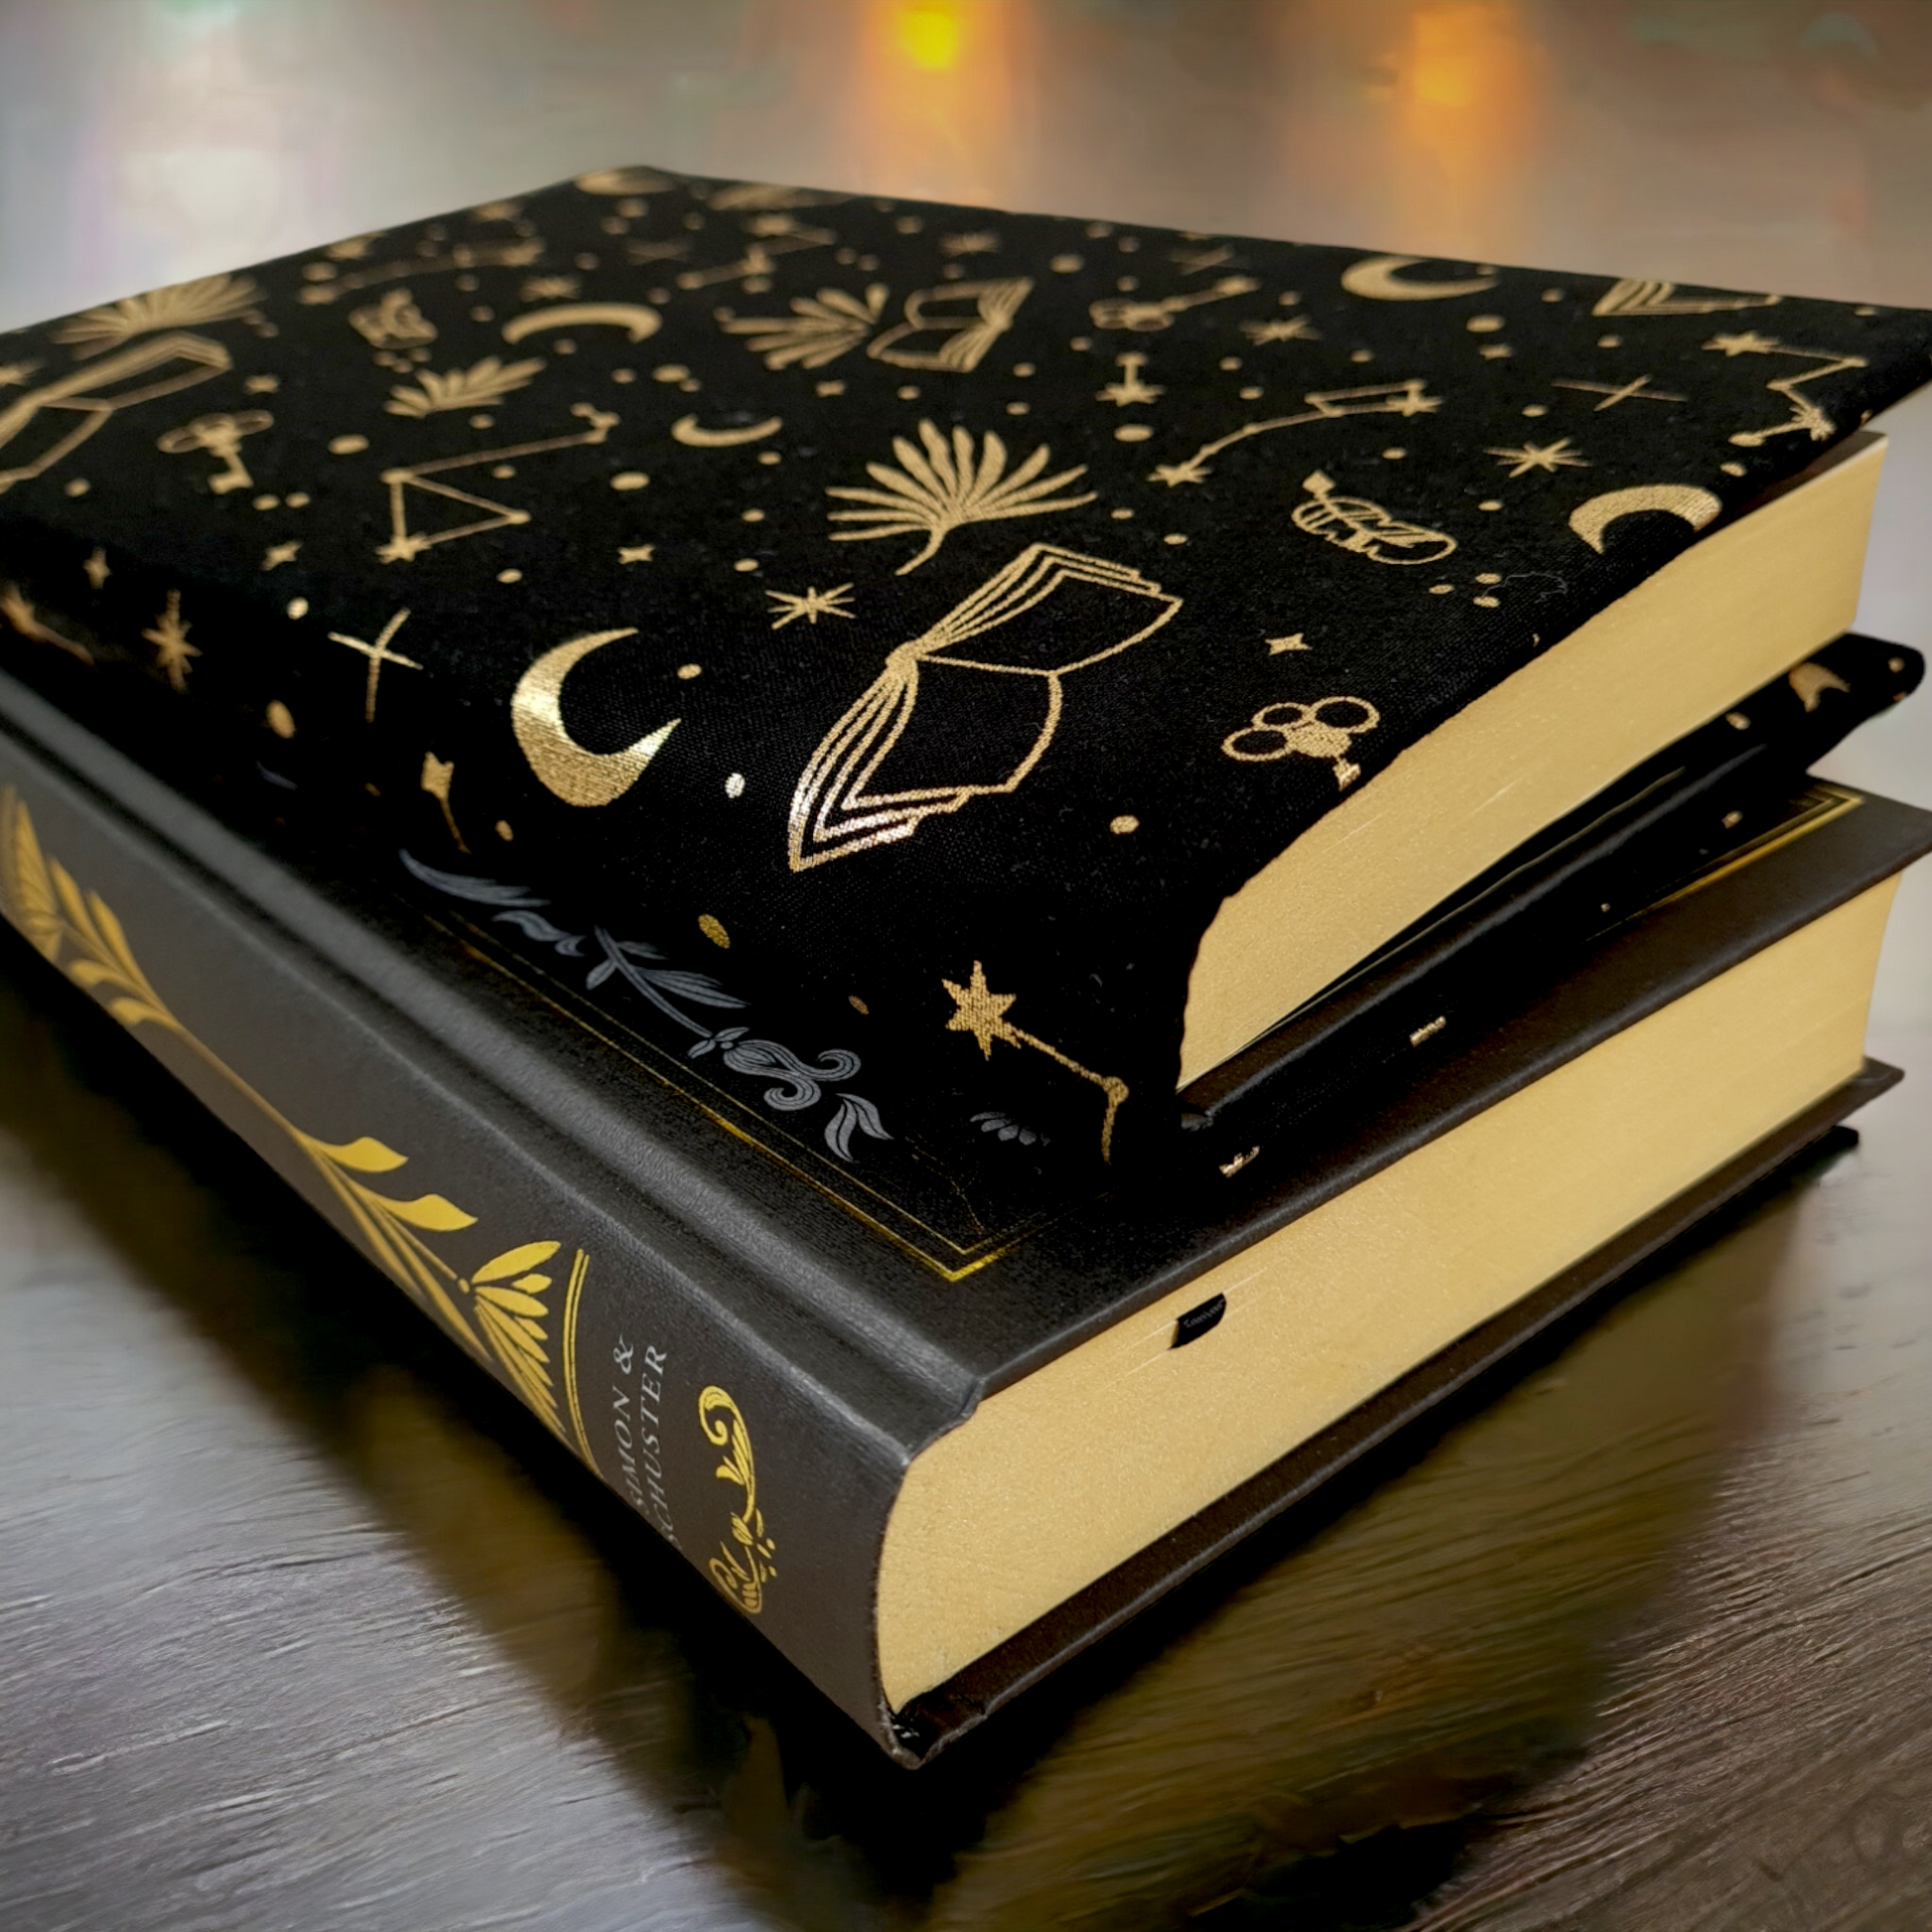 black and gold celestial reading fabric dust jacket book cover